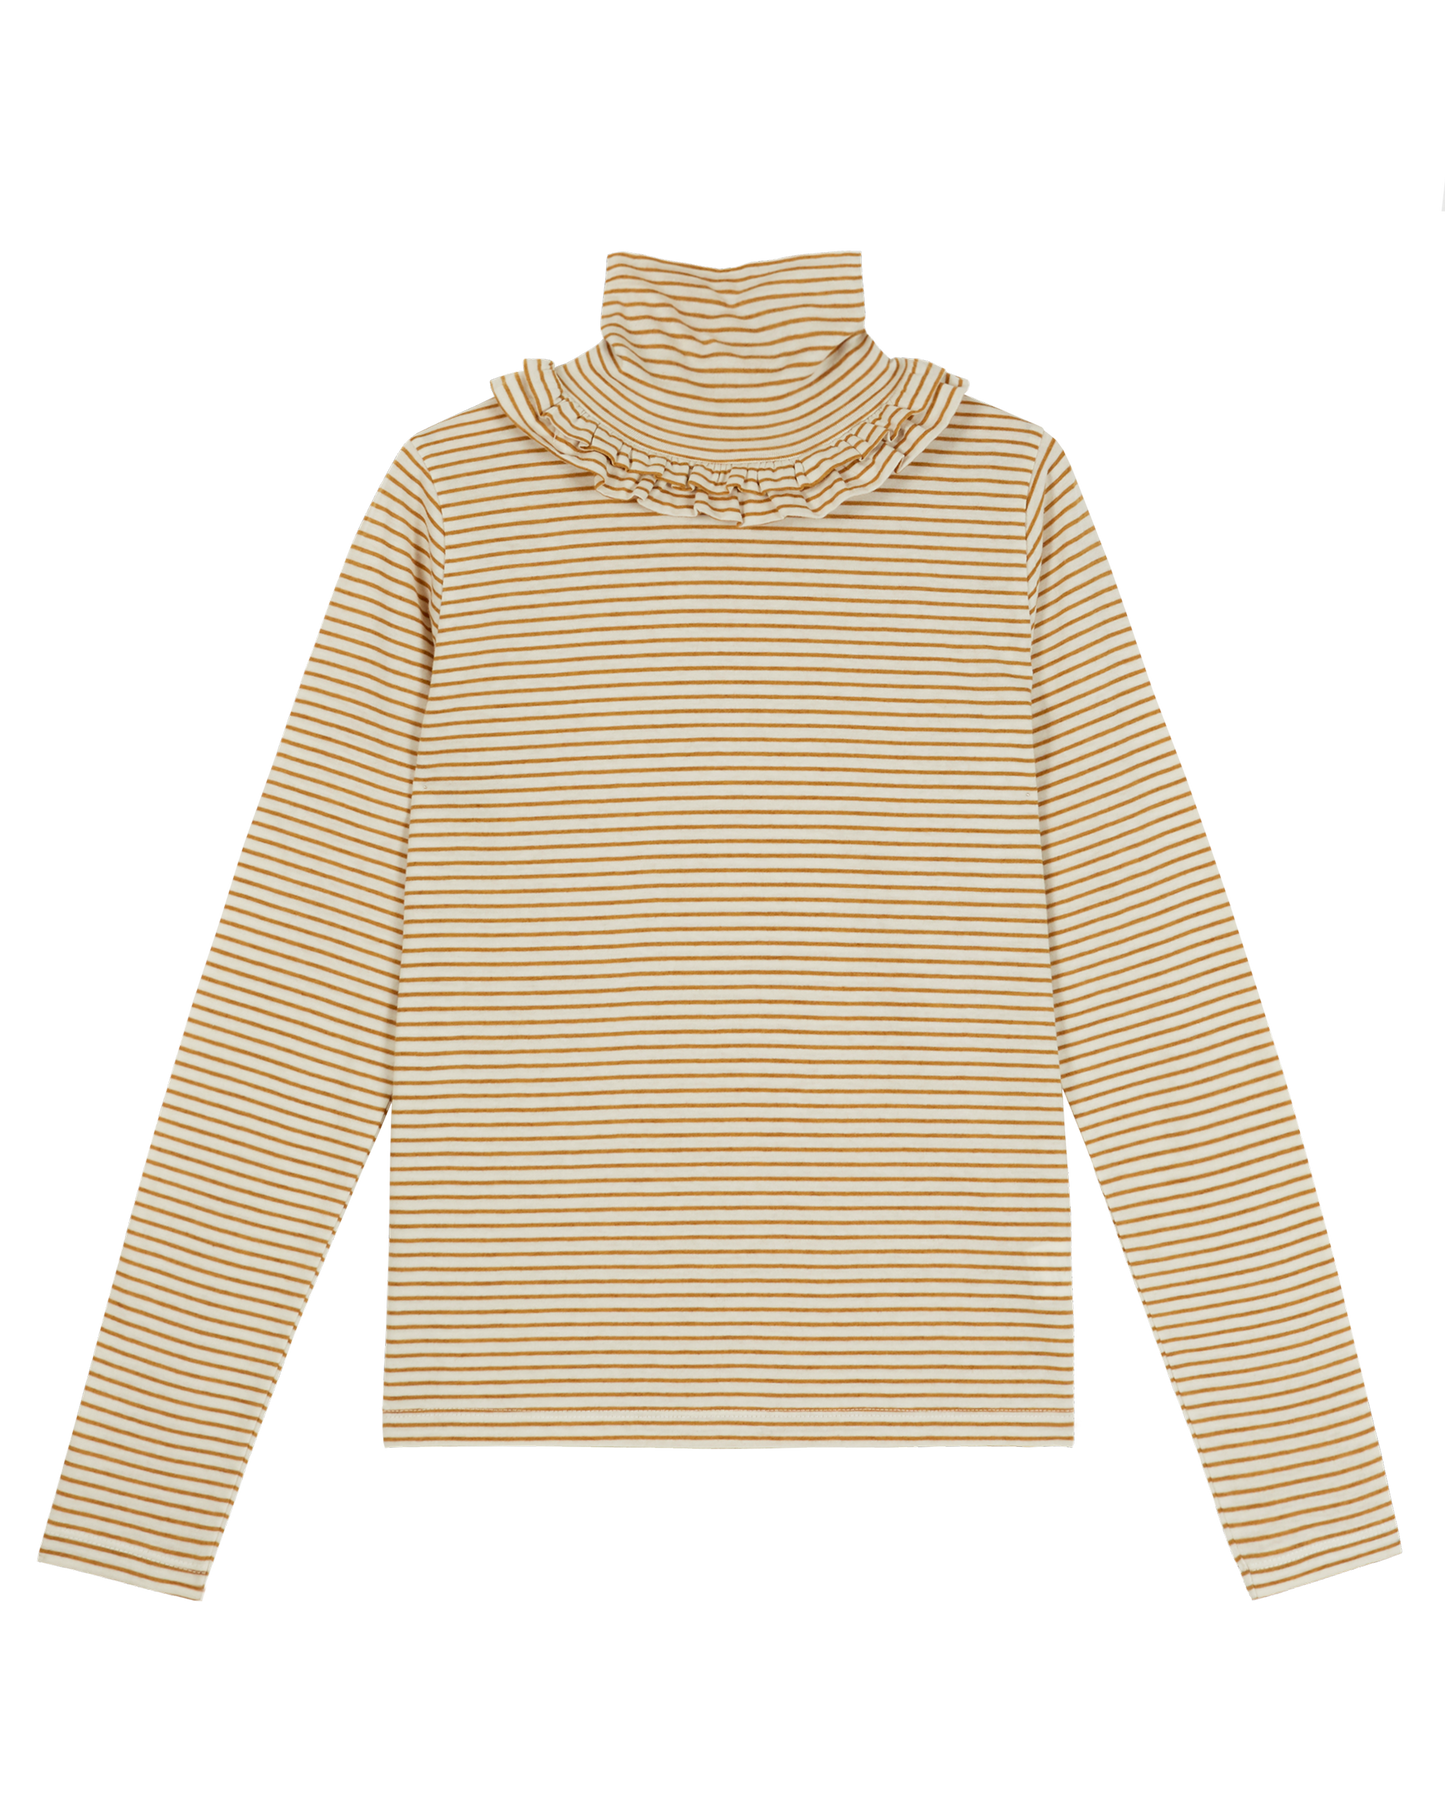 Sous-pull femme rayures coton bio biscotte